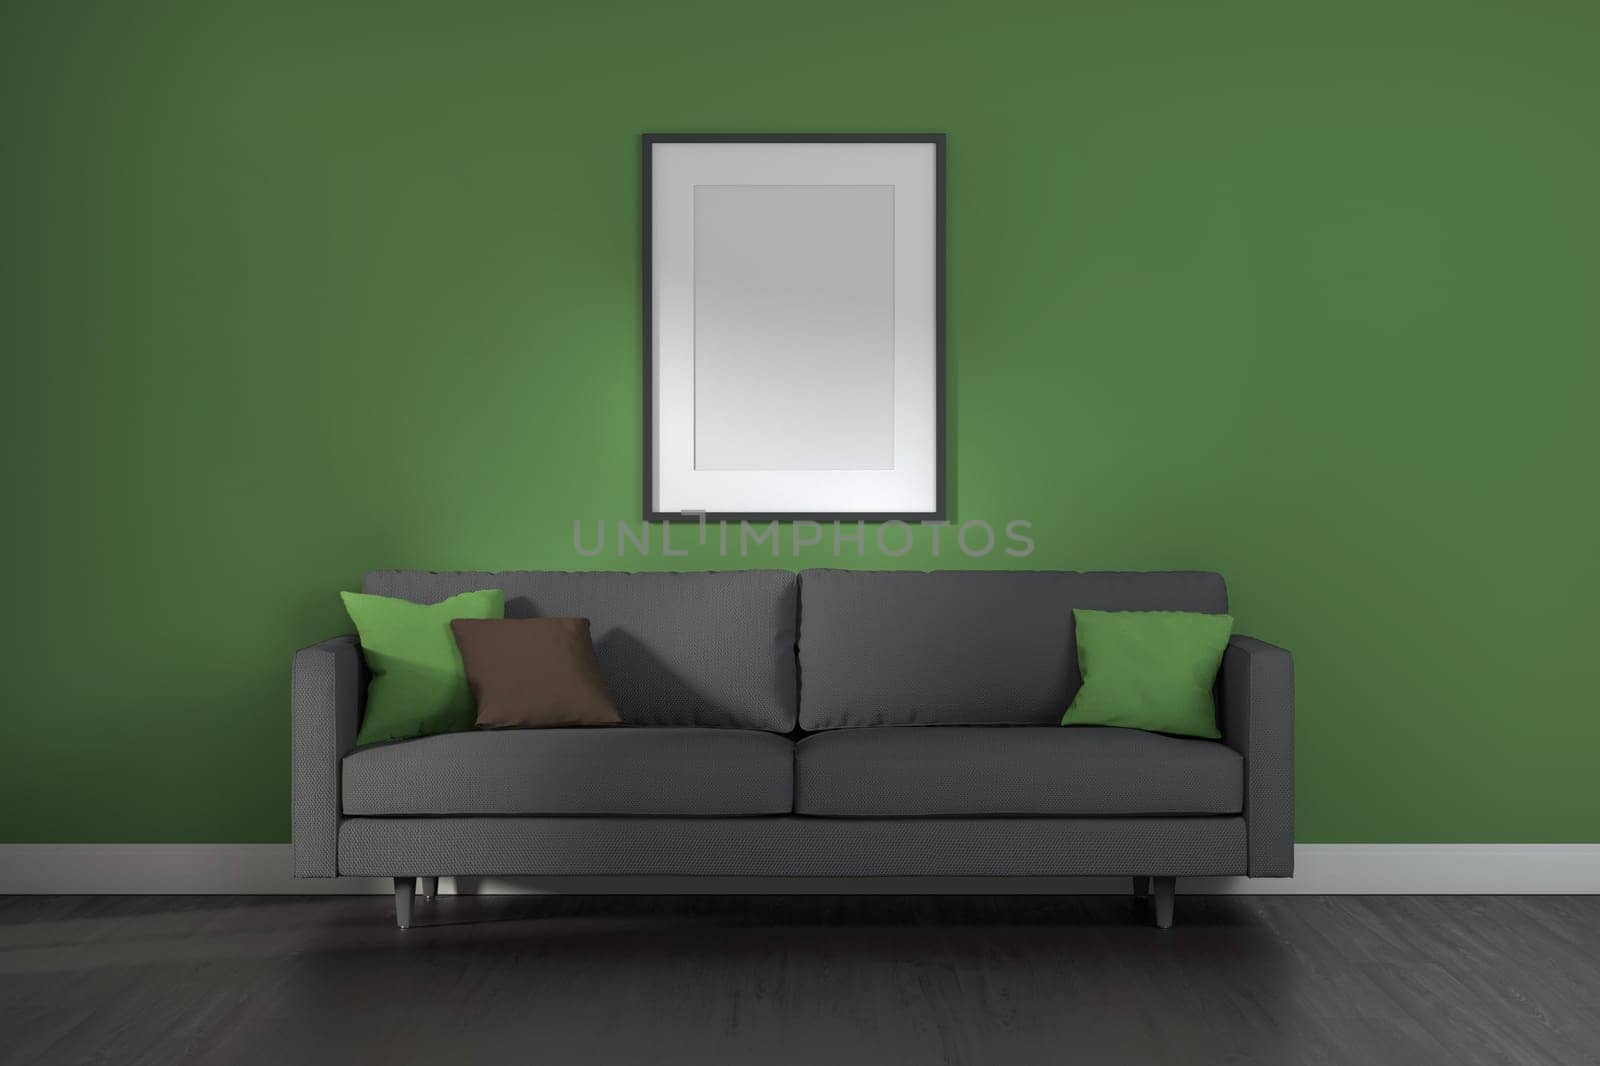 Living room interior with gray sofa, pillows, green plaid and frame on green wall background by ImagesRouges